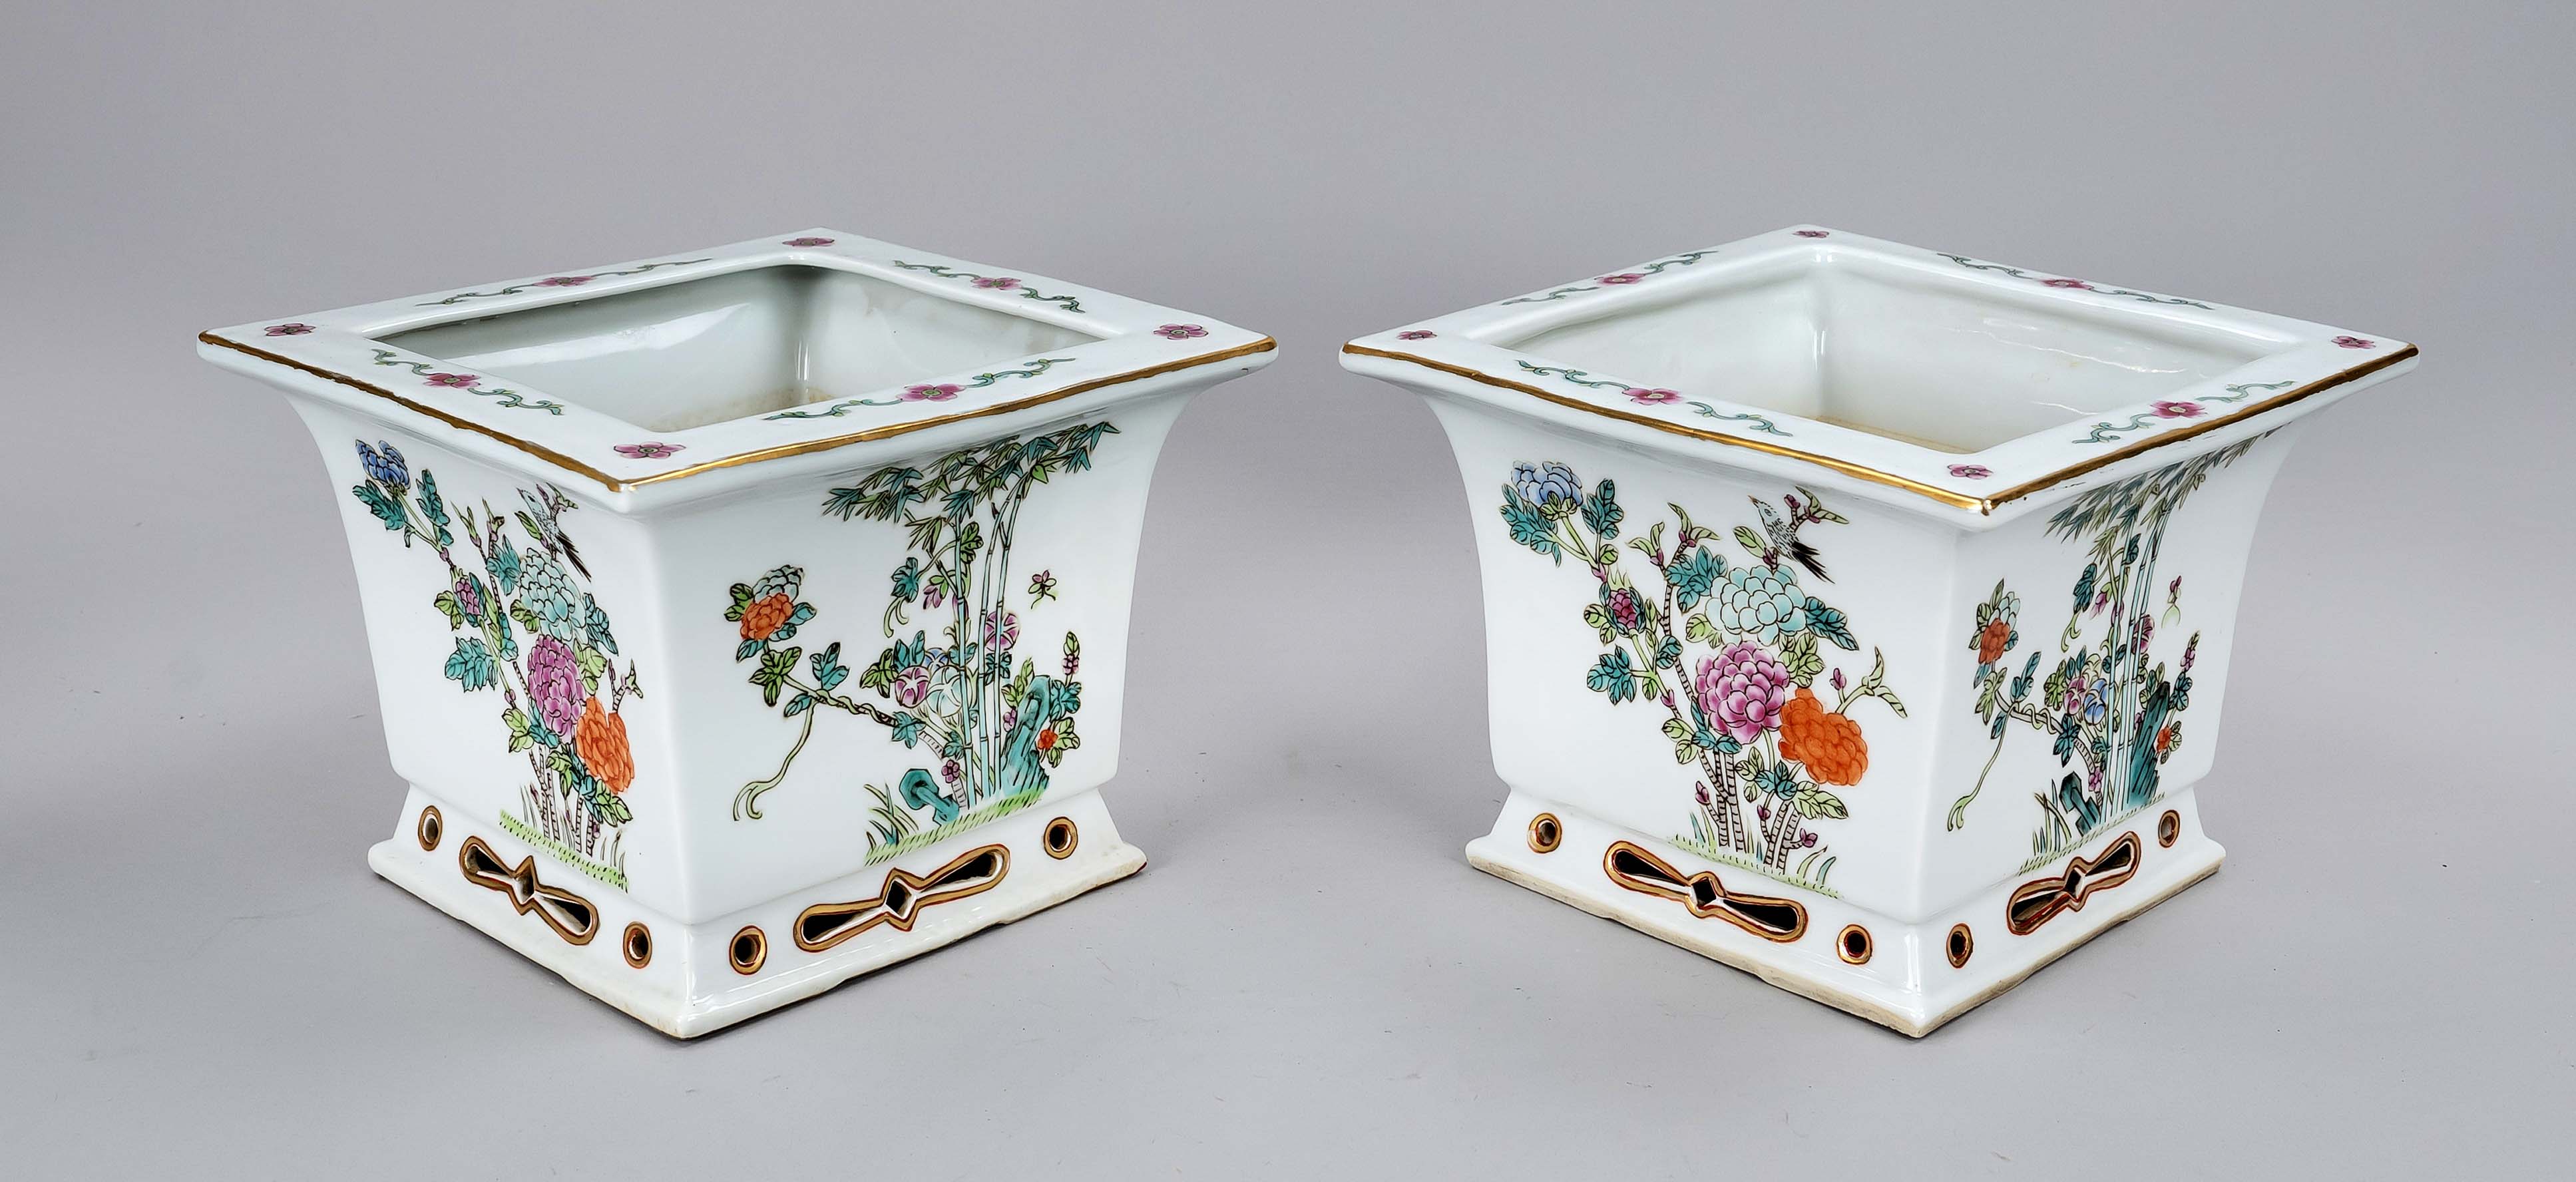 Pair of cachepots, China, 20th c., porcelain with polychrome glaze decoration of various flowers